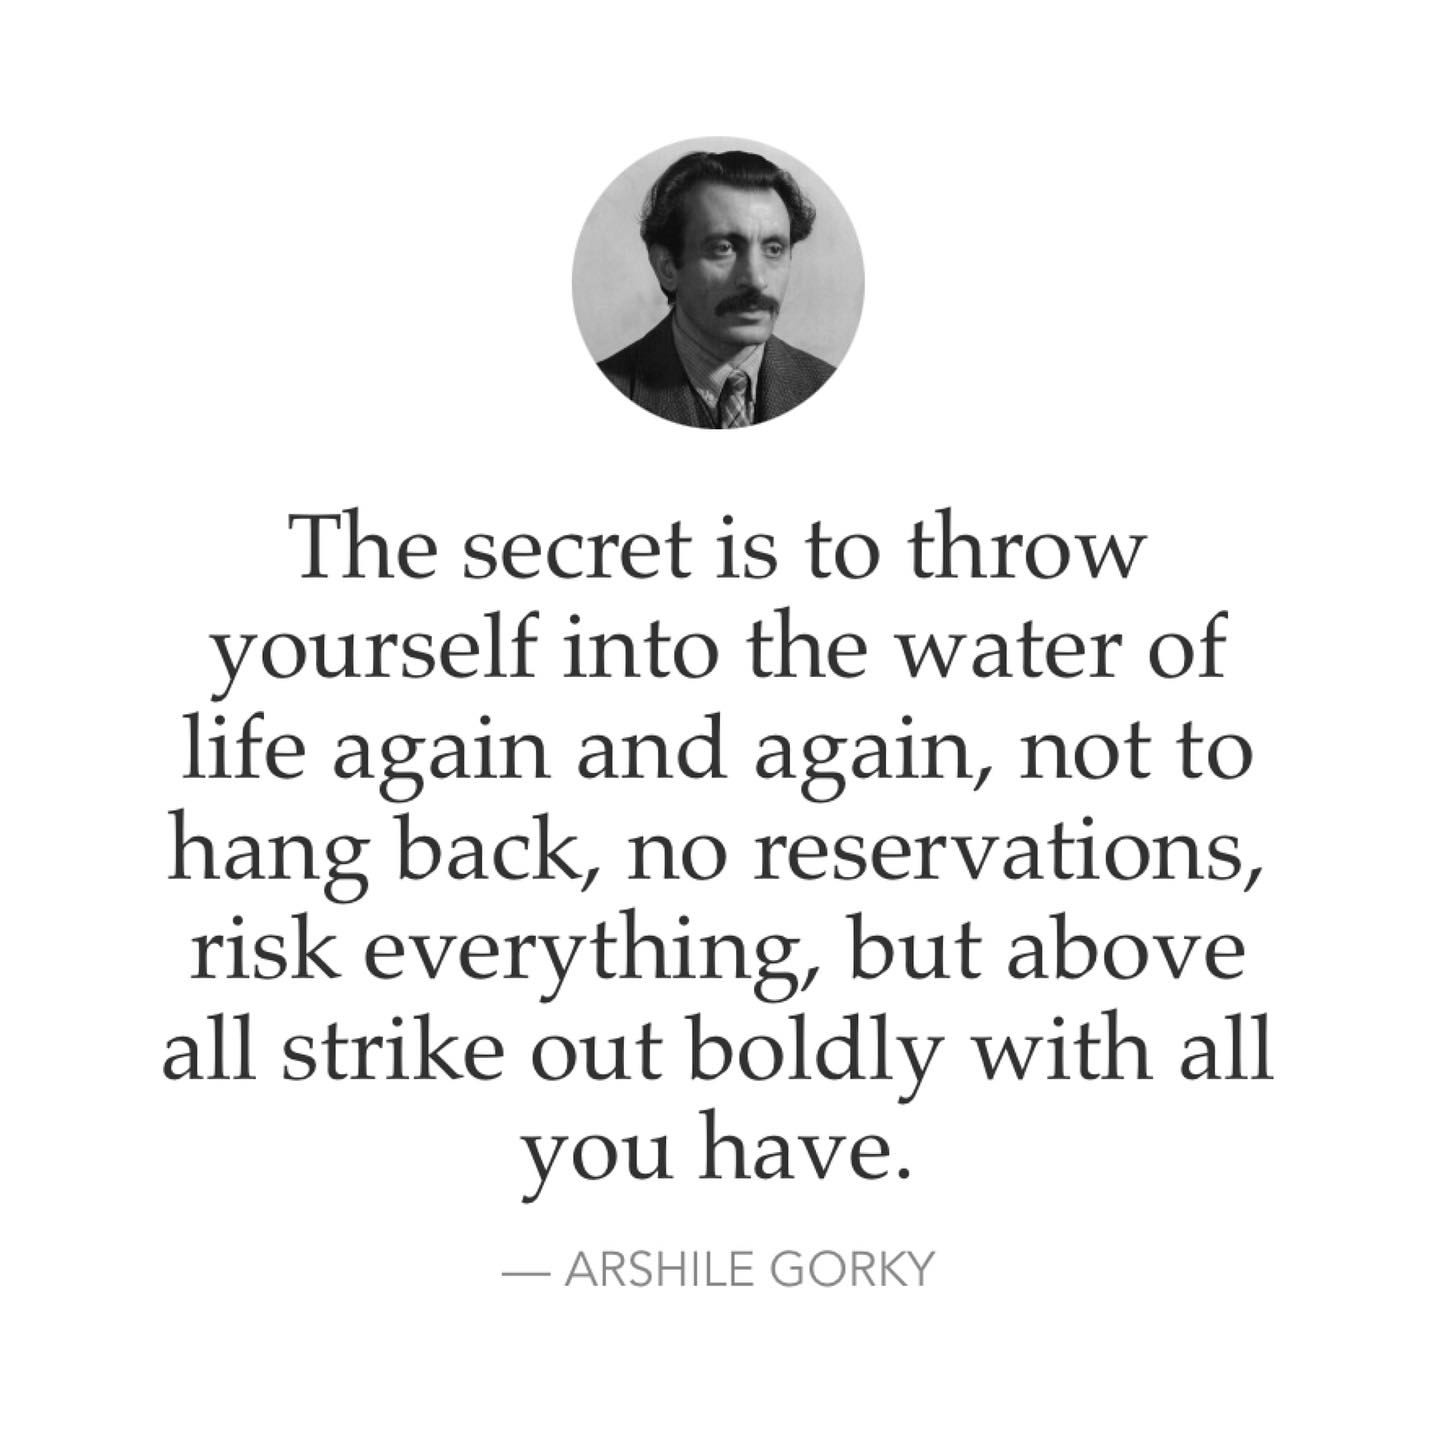 The secret is to throw yourself into the water of life again and again, not to hang back, no reservations, risk everything, but above all strike out boldly with all you have. ArshilE Gorky.